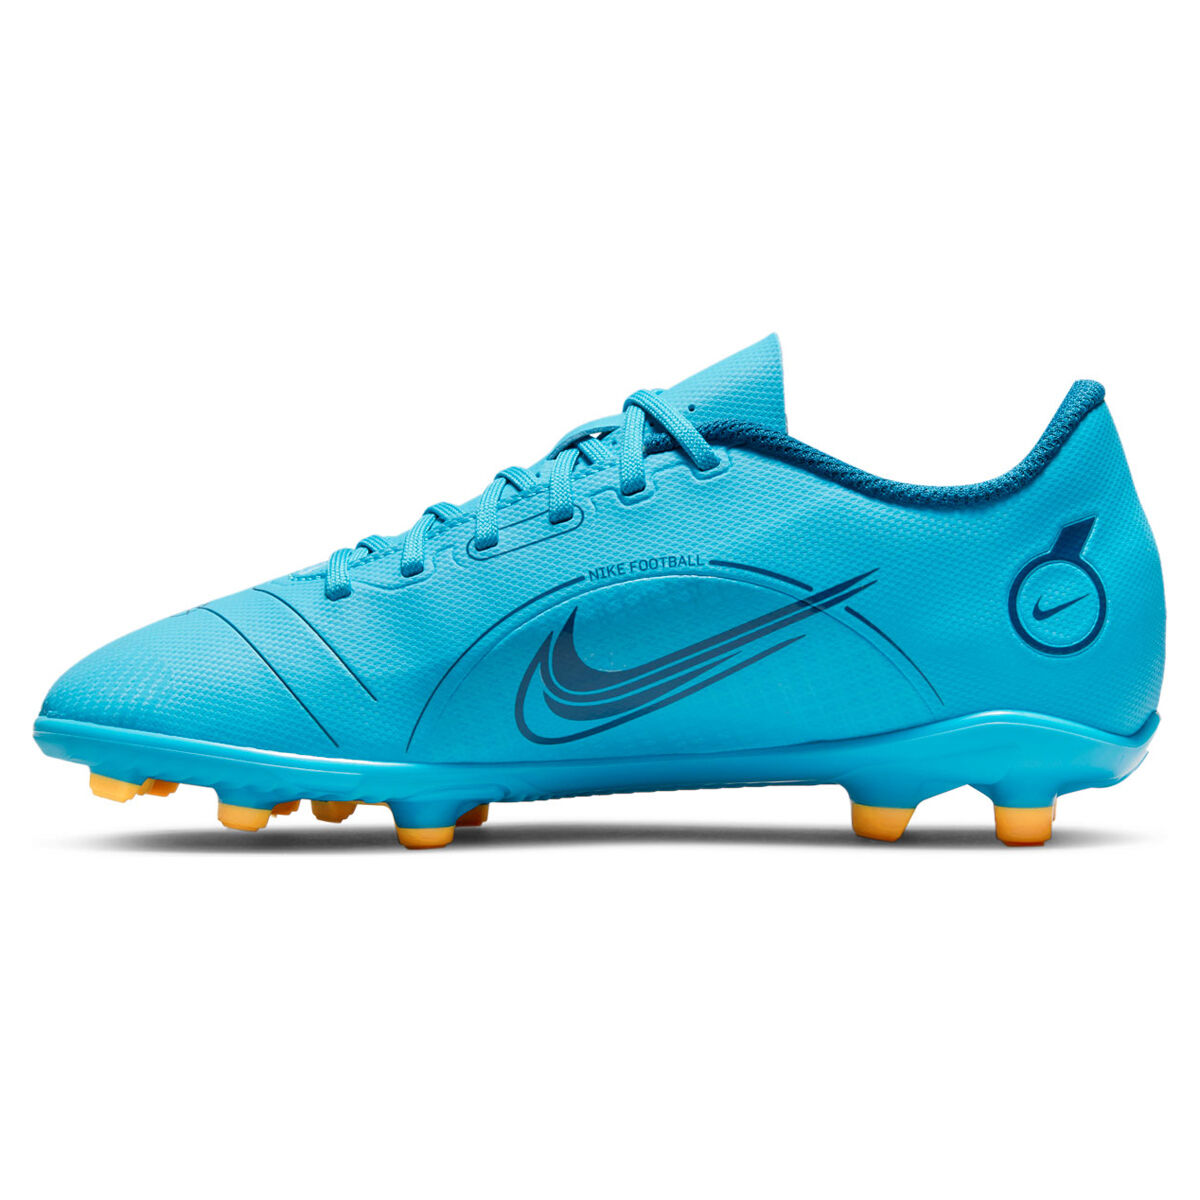 Football Boots Kids Boys Size 12.5 Unisex Soccer Shoes Teenager FG/AG Football Shoes Outdoor FG Football Shoes Athletics Training Running Shoes Sneakers Blue 